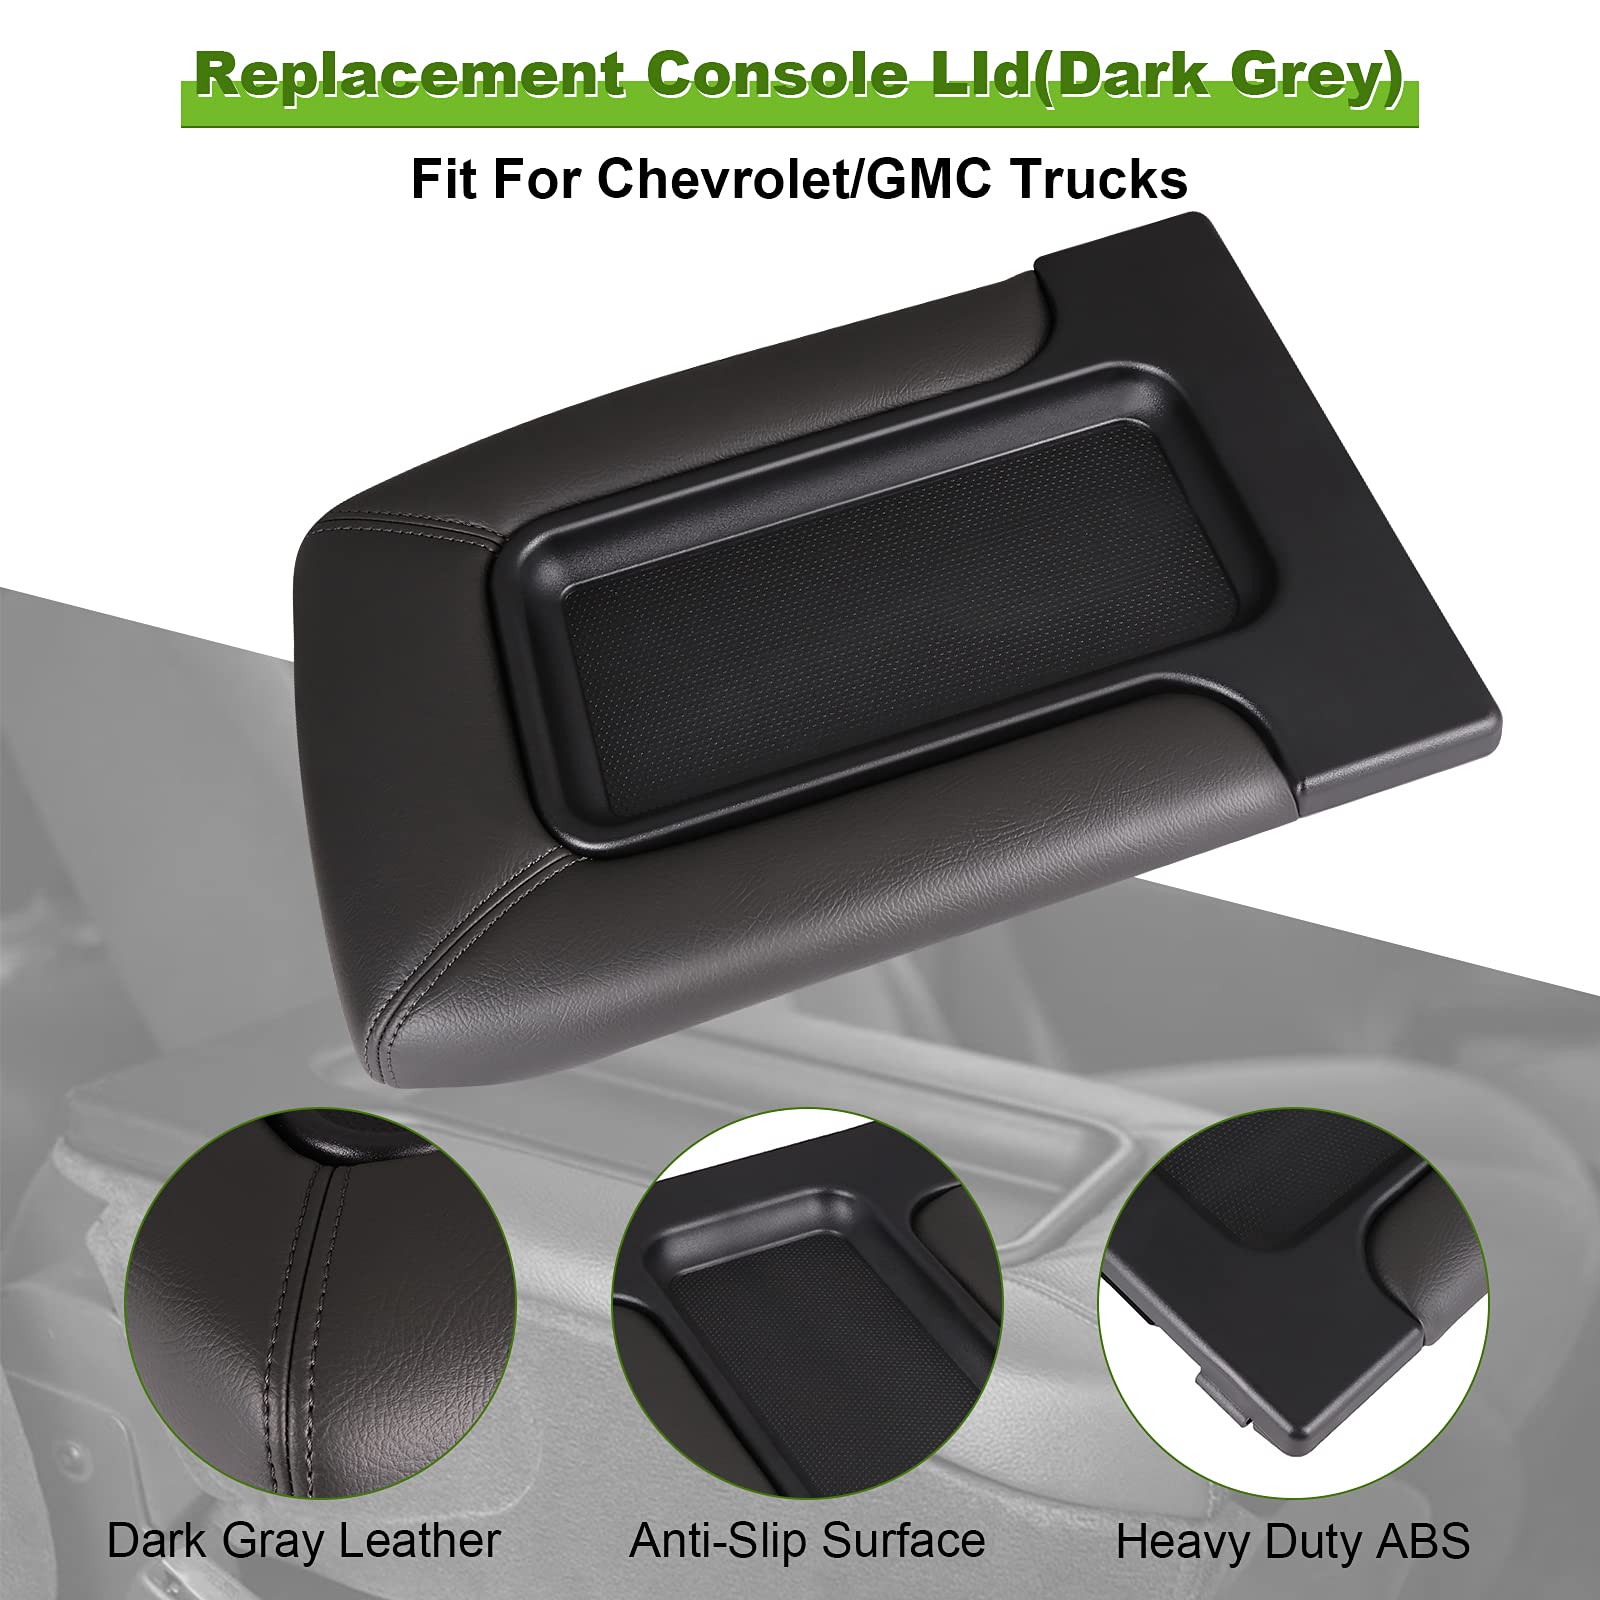 SCITOO Auto Dark Grey Center Console Lid Kit Replacement fit for 2001-2007 for GMC Sierra for Chevrolet Silverado